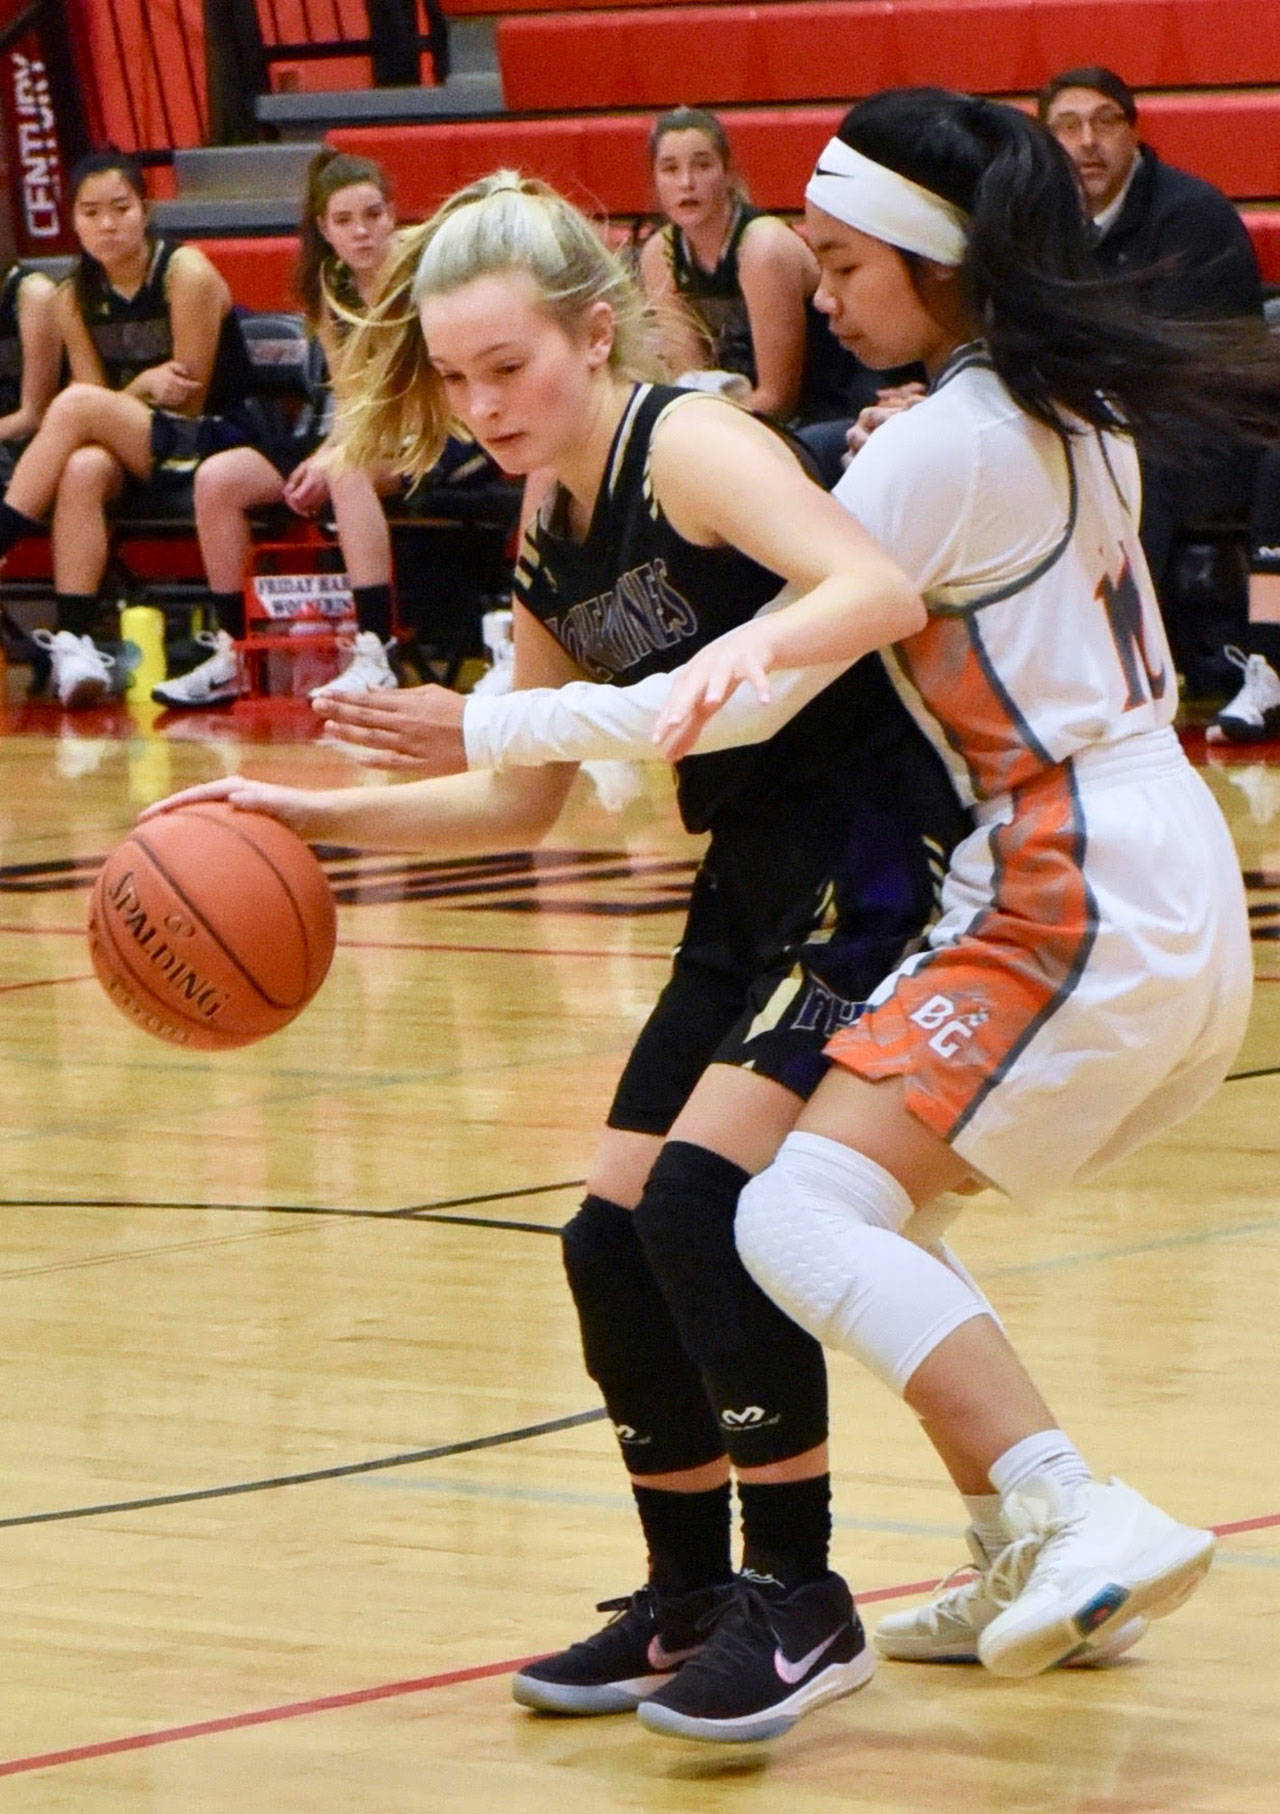 Contributed photo/John Stimpson                                Darcy Ayers maintains her cool under tight pressure from the defense.